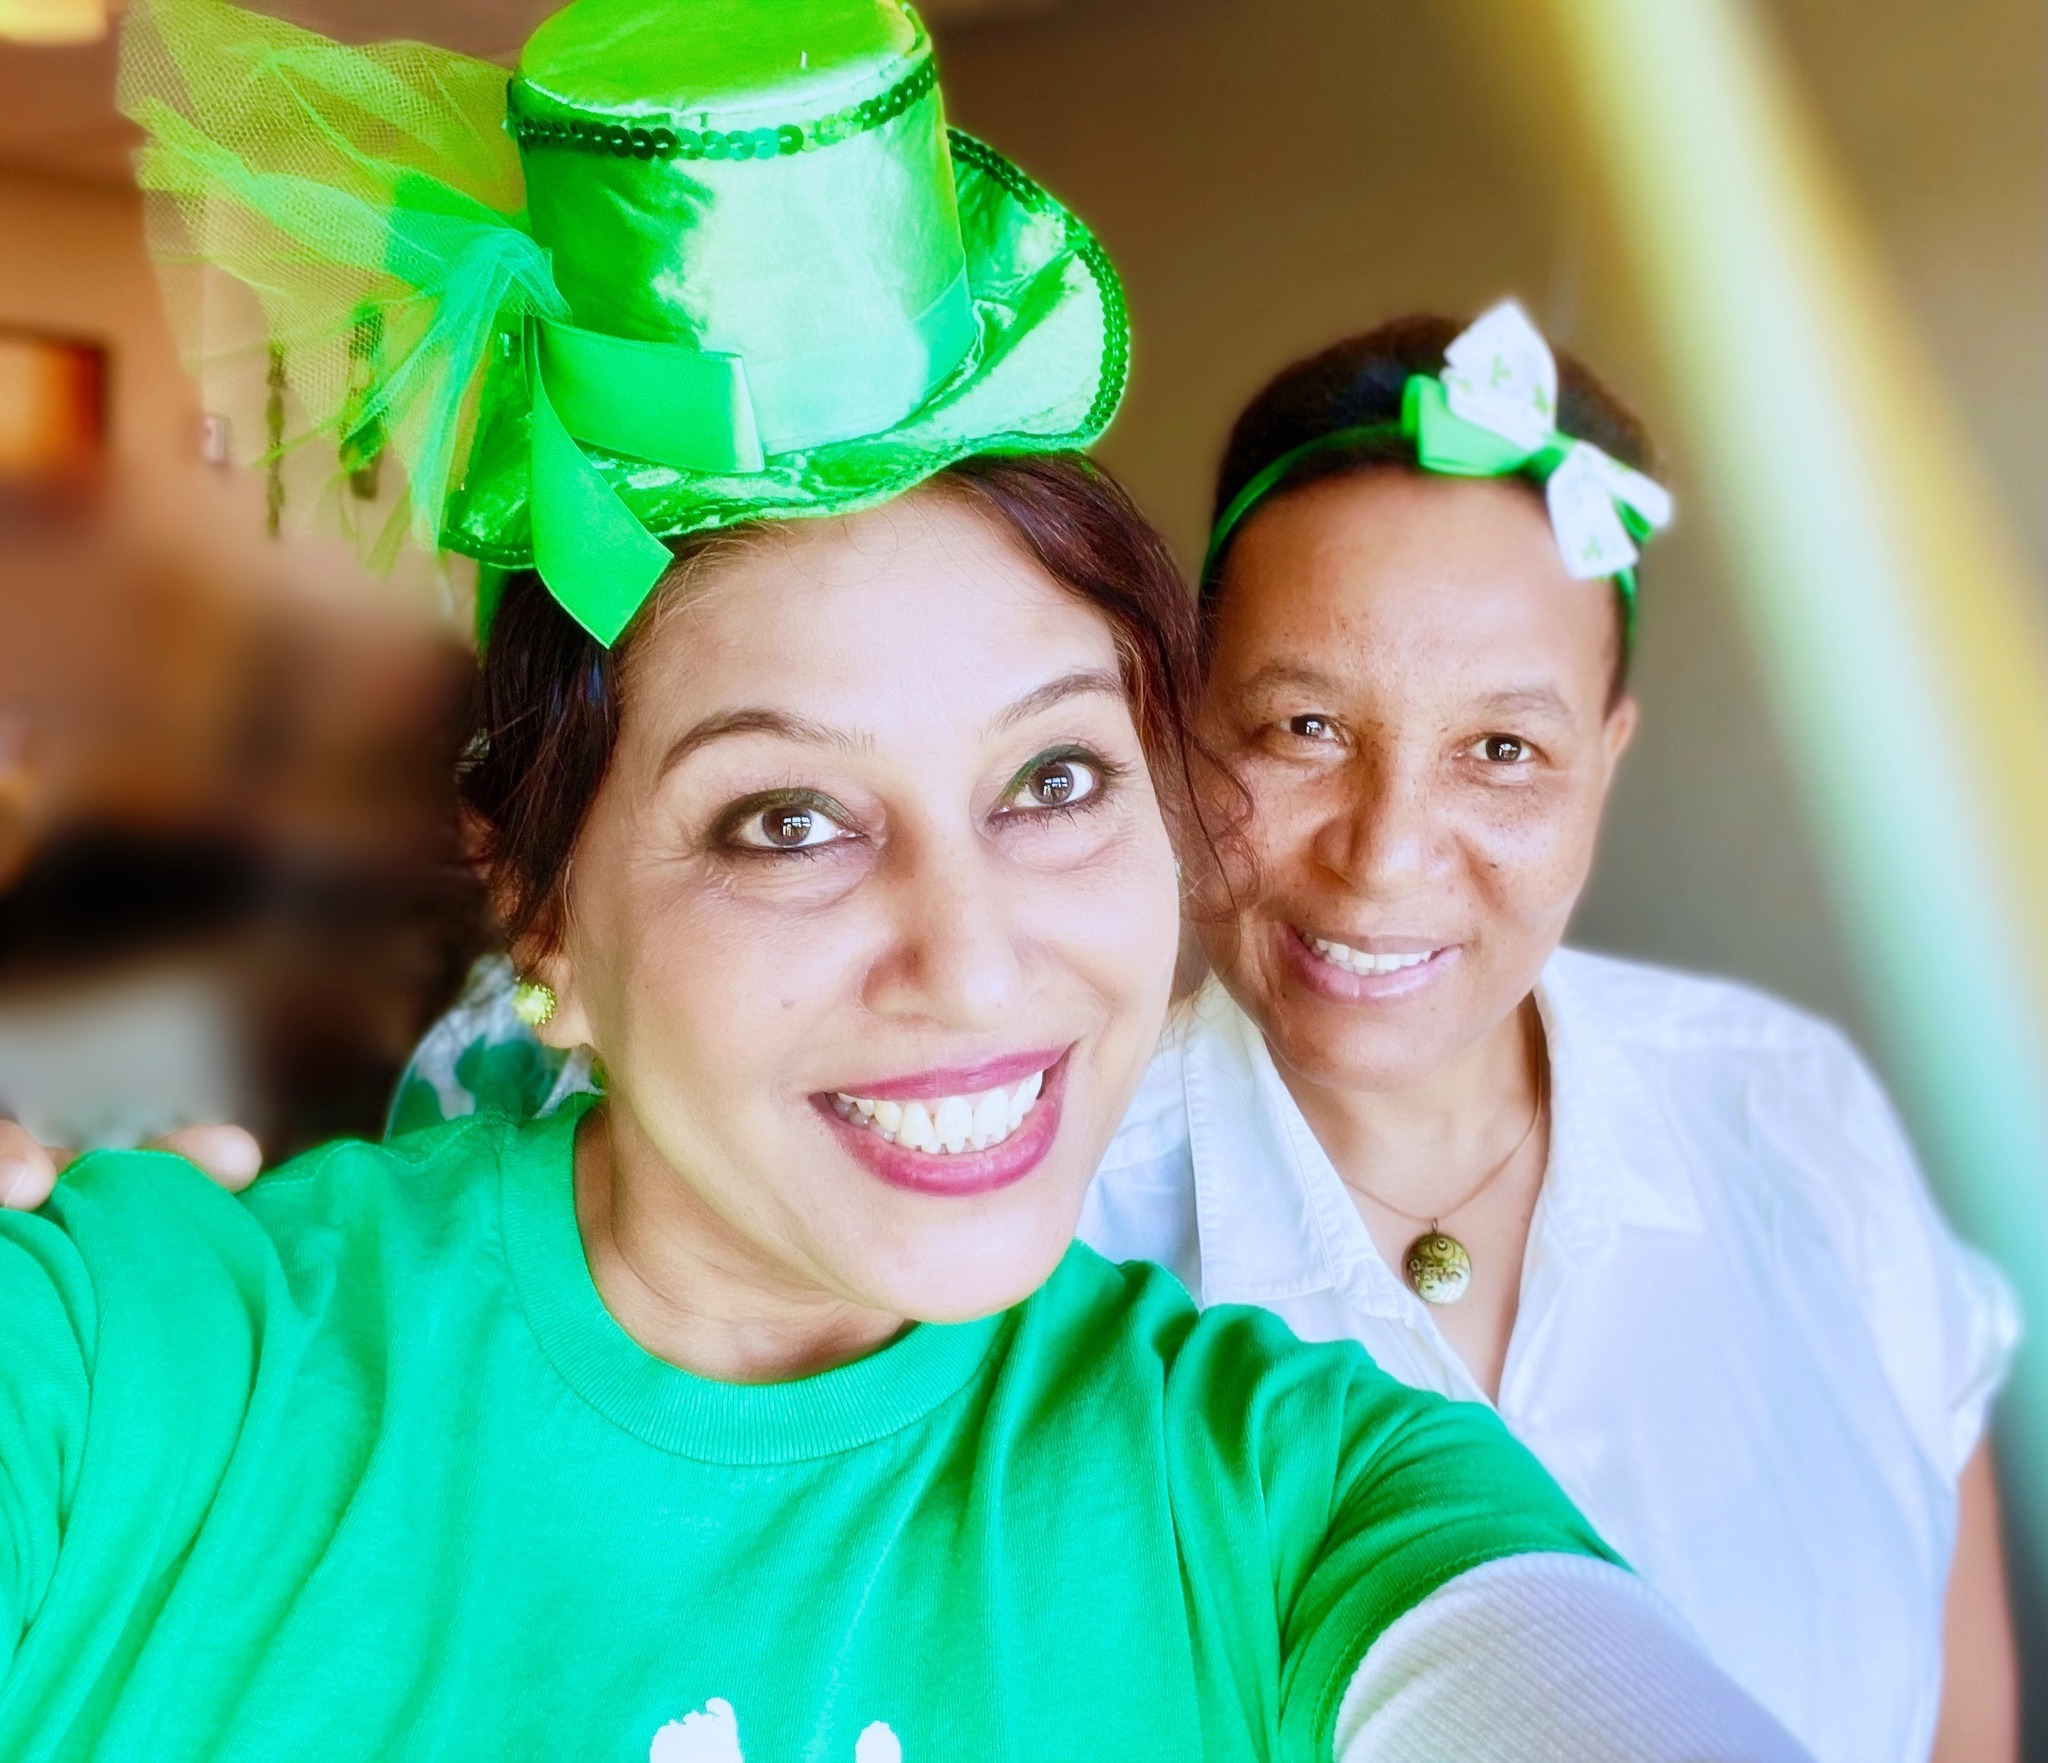 Featured image for “St. Patrick’s Day Celebrations”